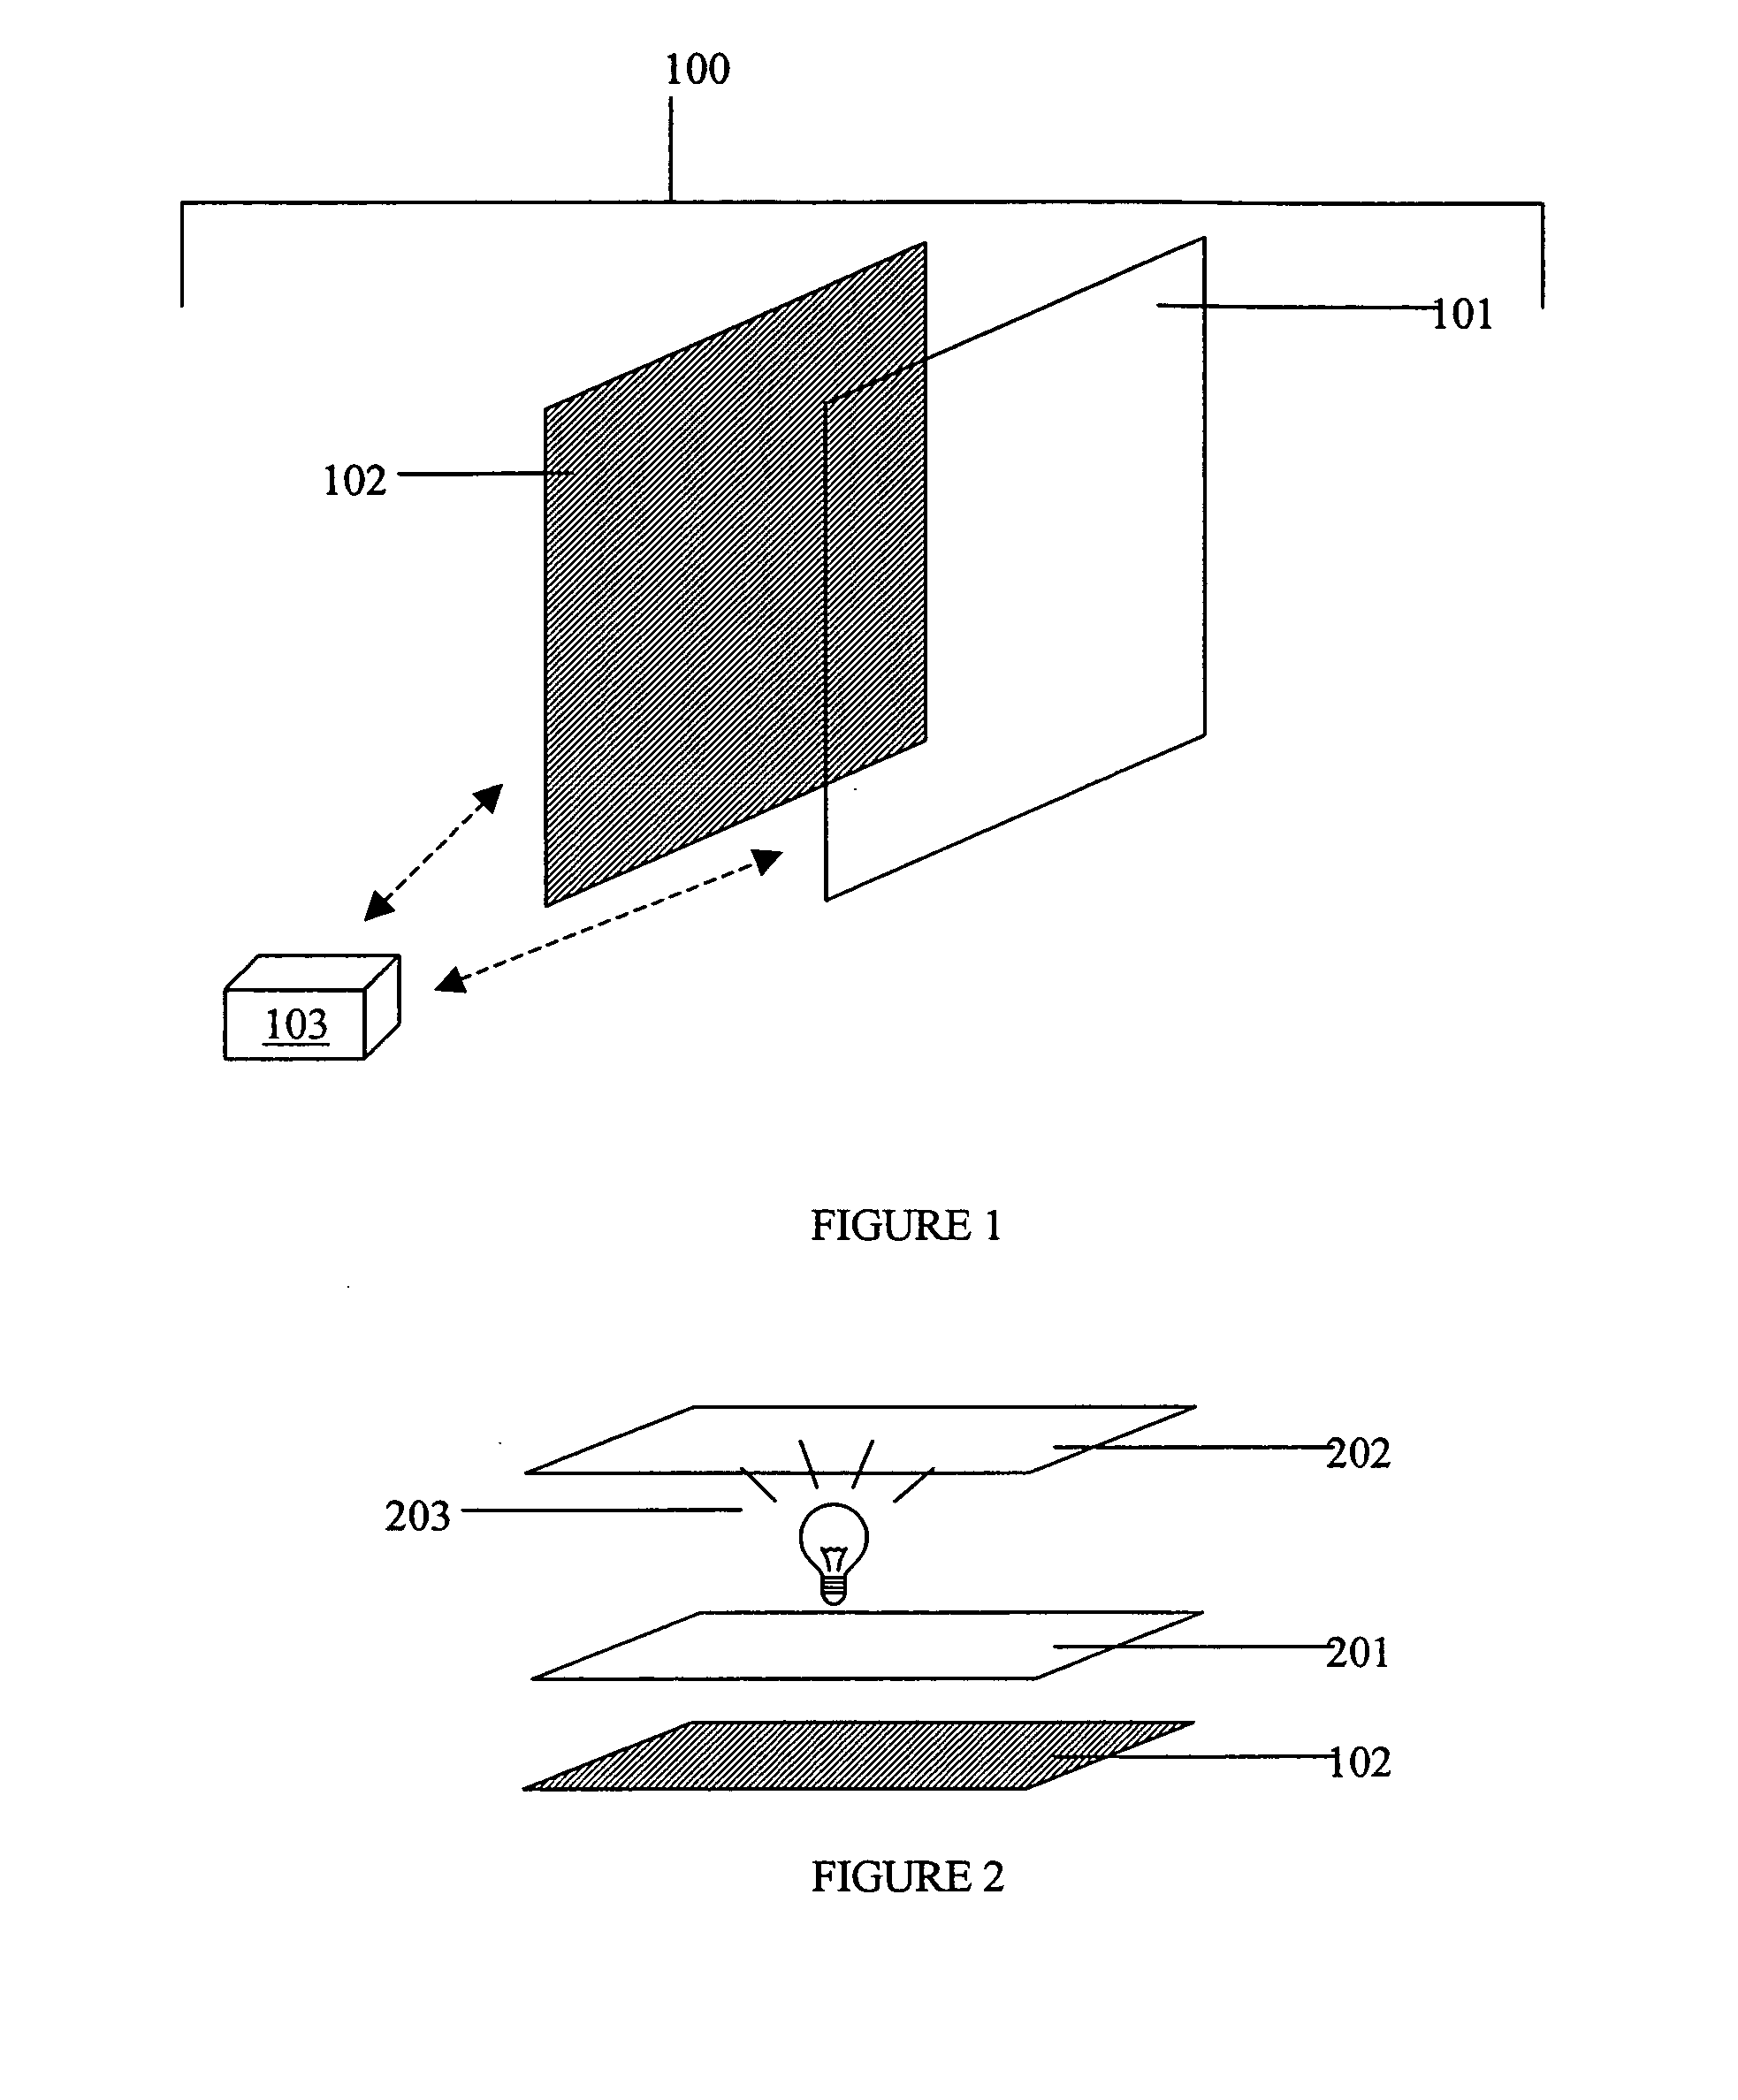 Man-machine interface for controlling access to electronic devices